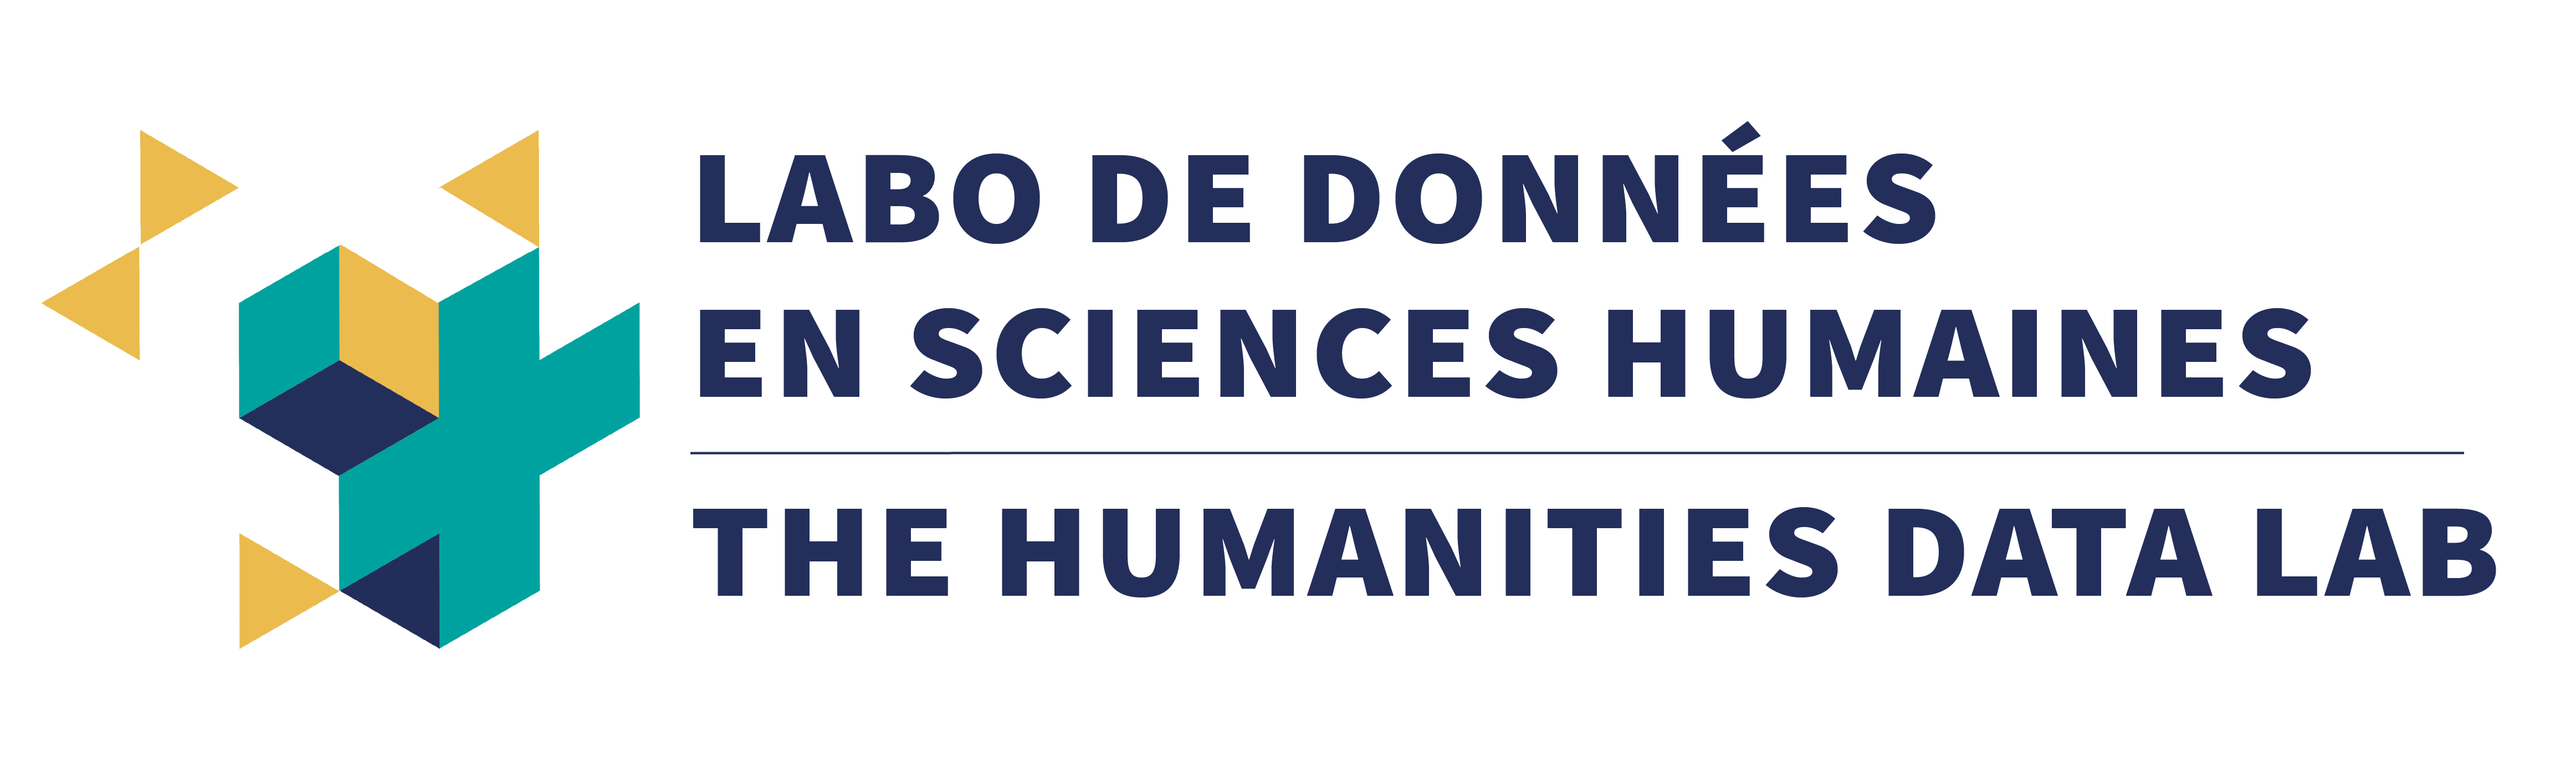 The Humanities + Data Lab